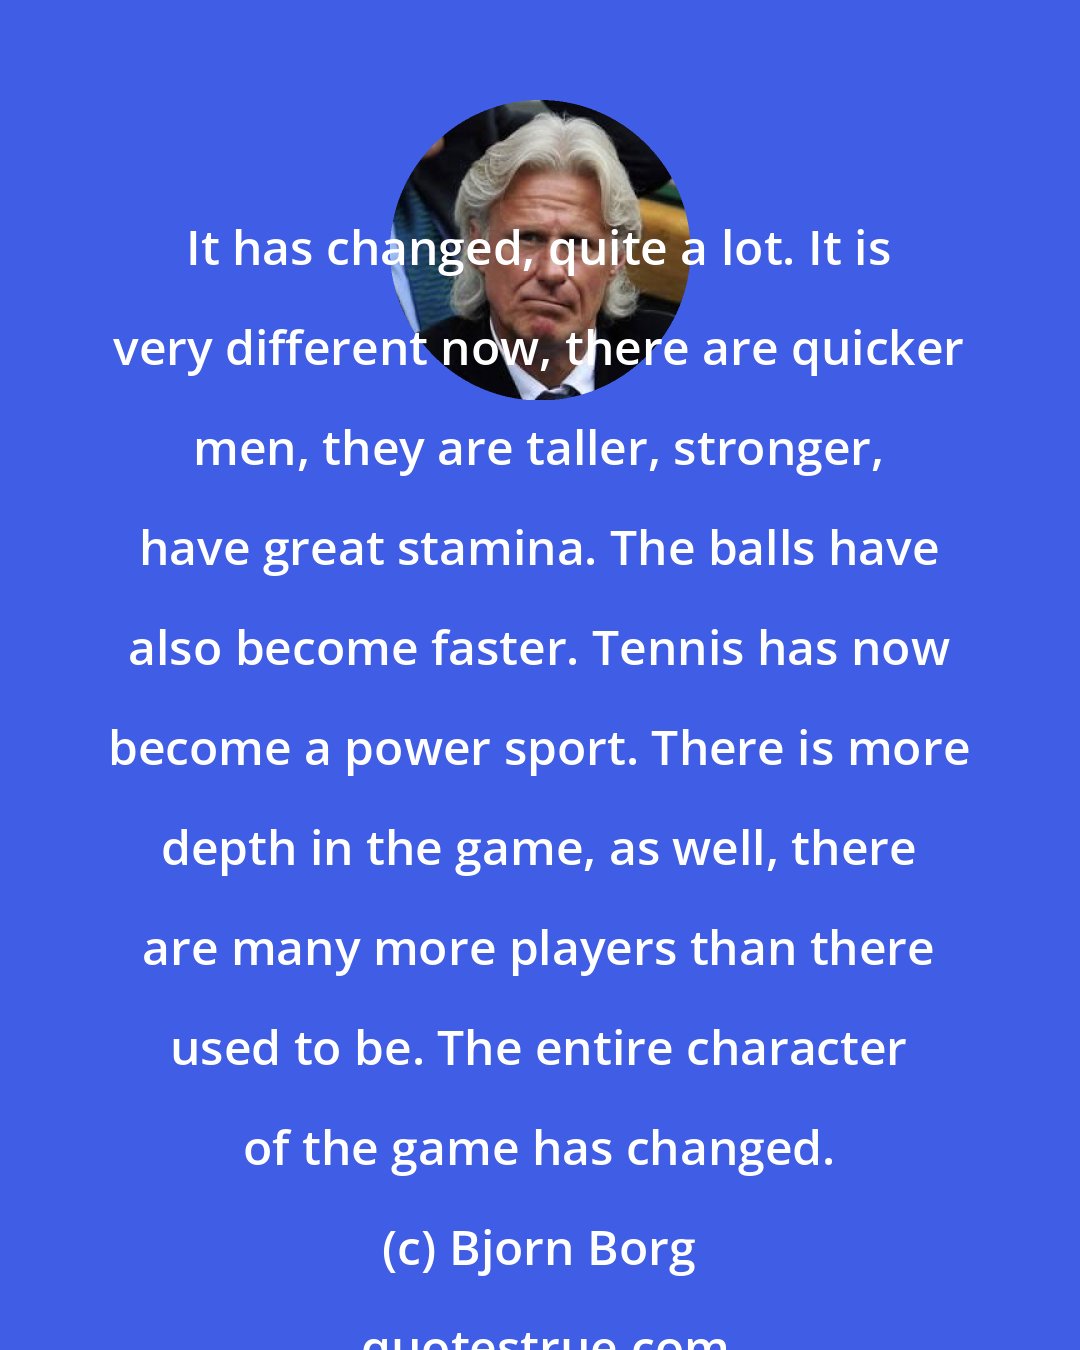 Bjorn Borg: It has changed, quite a lot. It is very different now, there are quicker men, they are taller, stronger, have great stamina. The balls have also become faster. Tennis has now become a power sport. There is more depth in the game, as well, there are many more players than there used to be. The entire character of the game has changed.